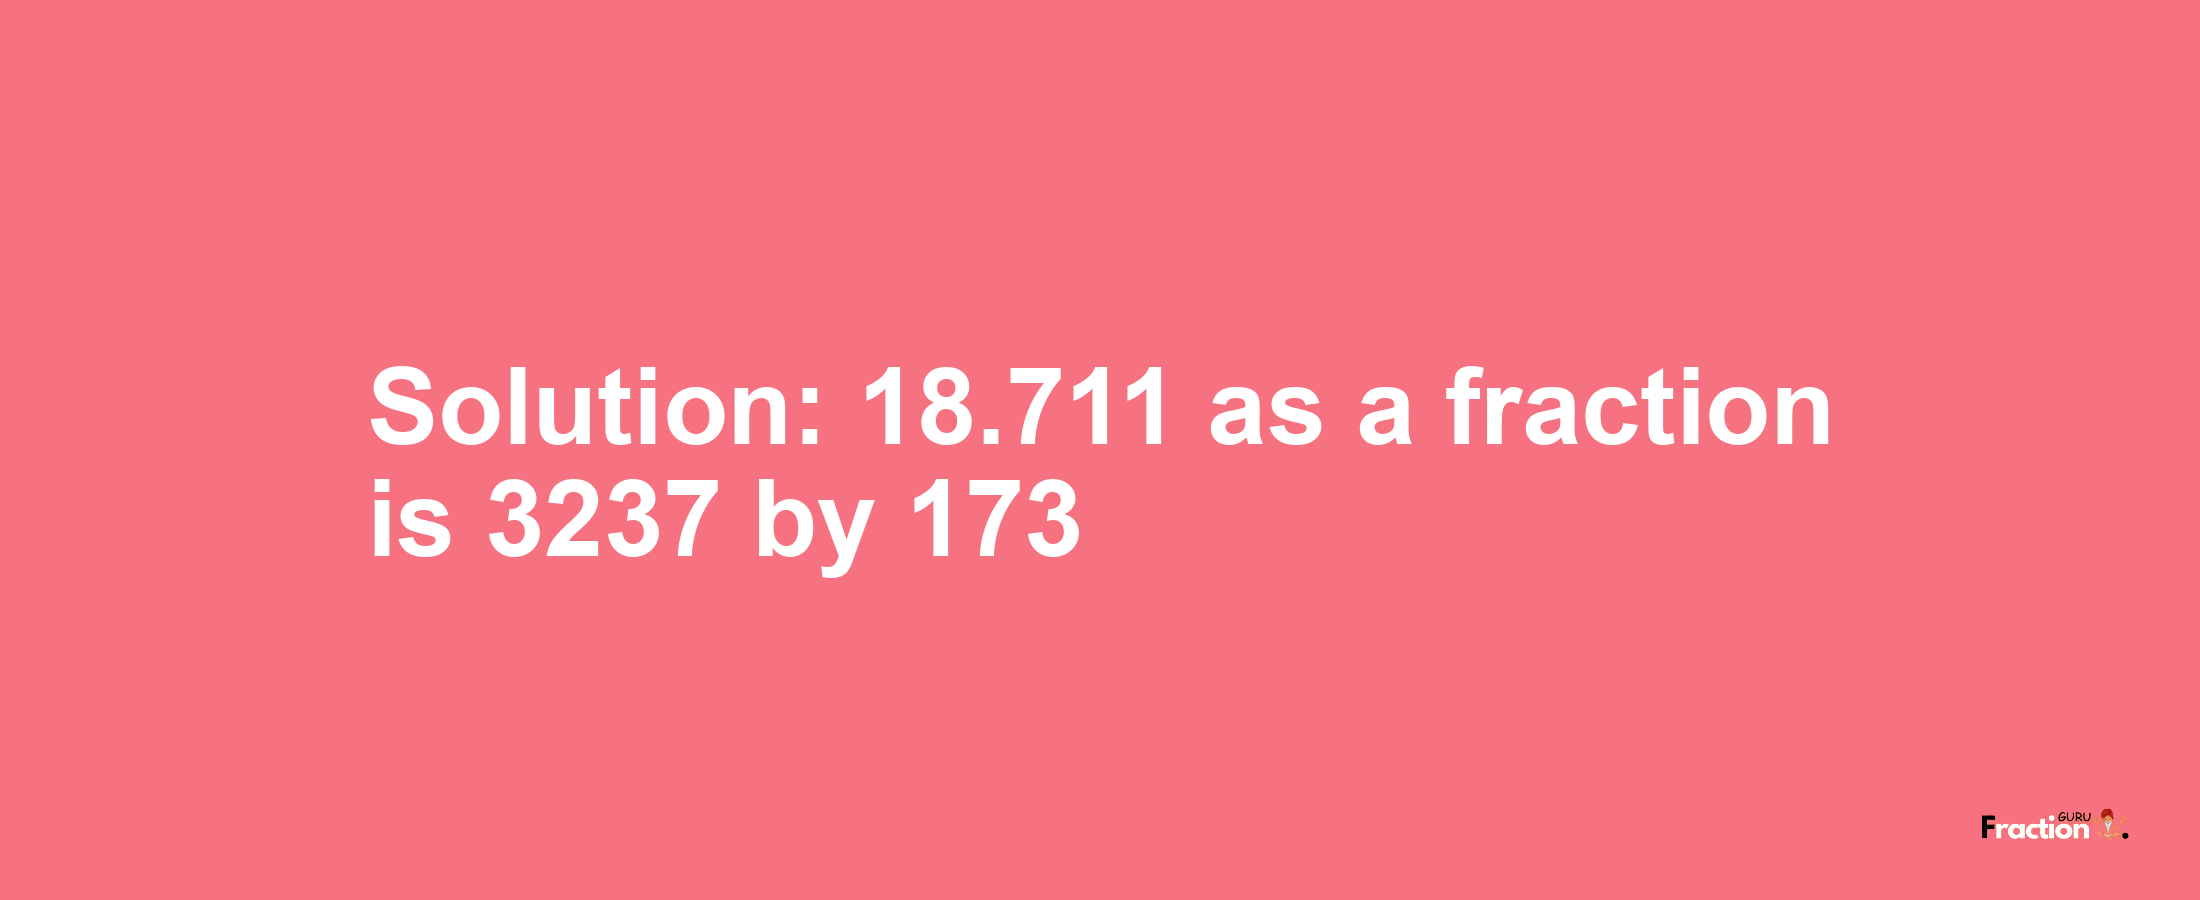 Solution:18.711 as a fraction is 3237/173